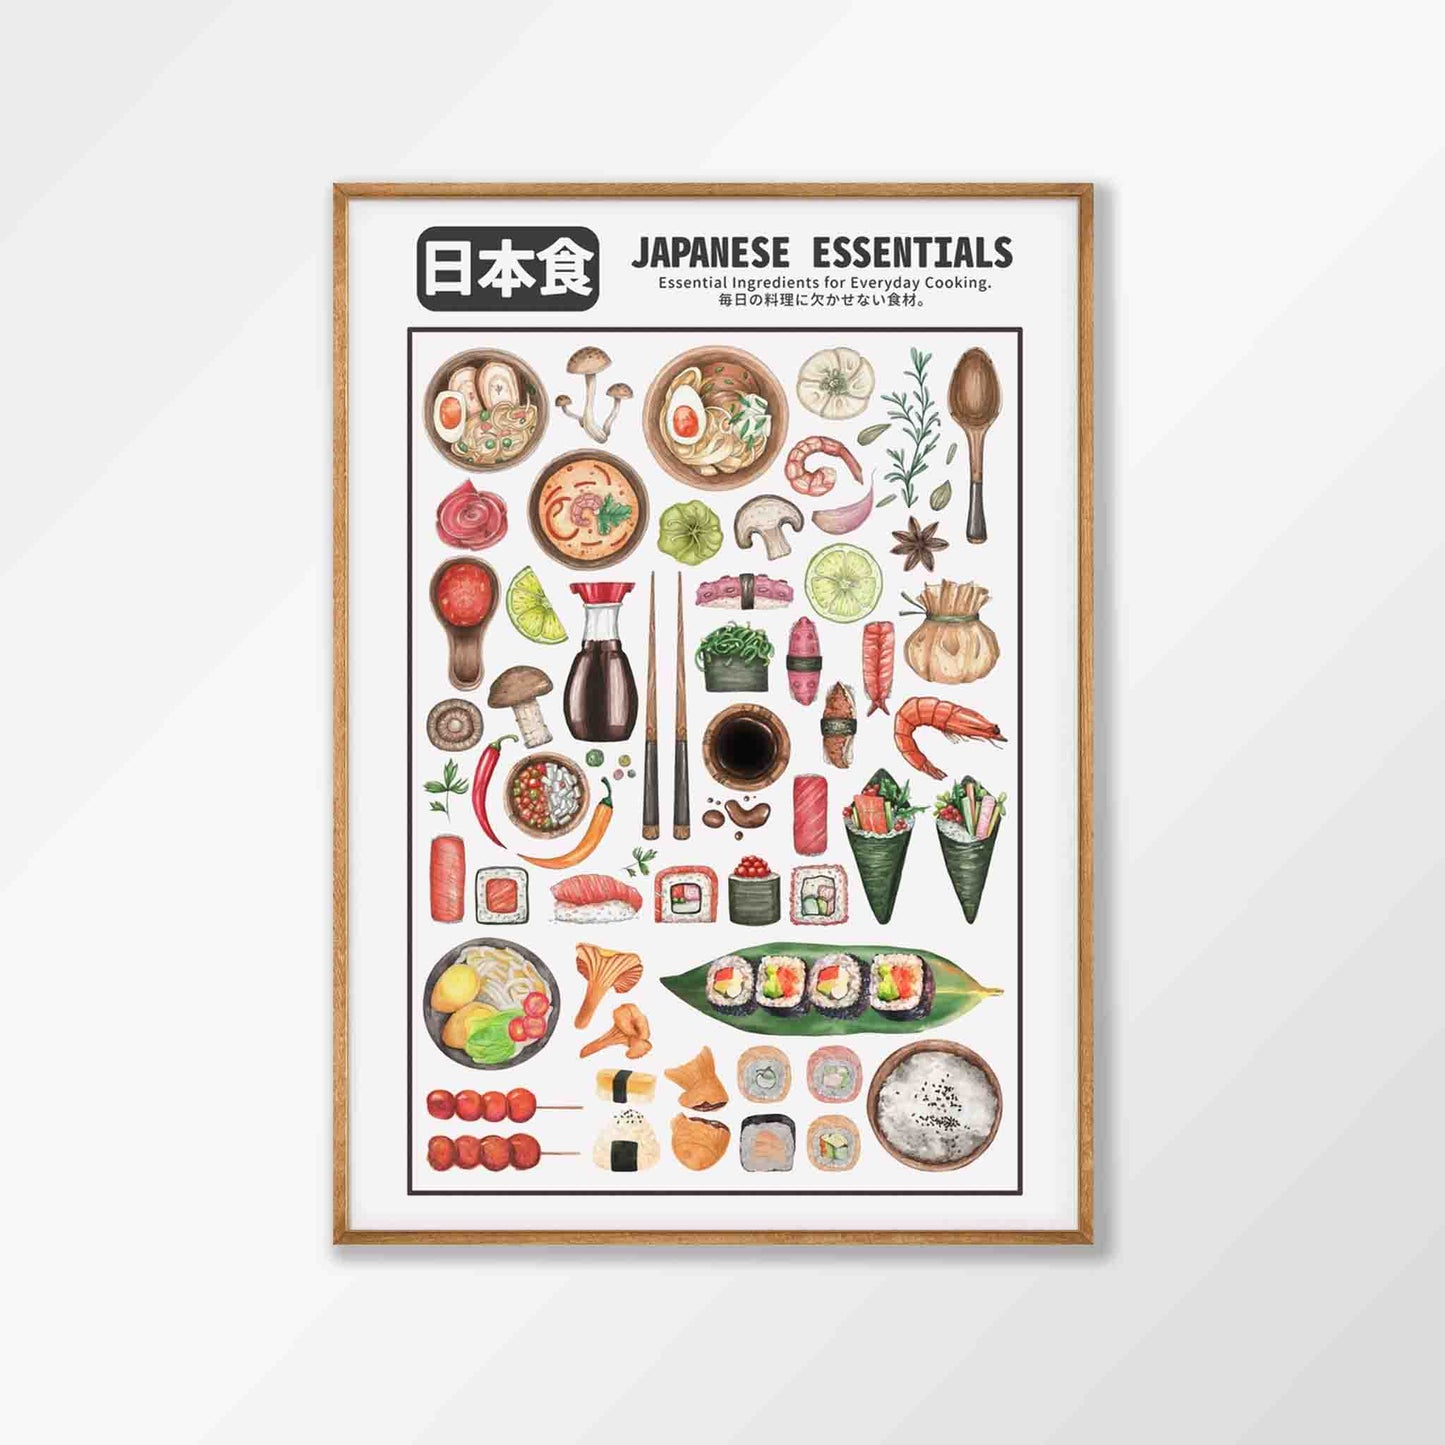 Japanese Cooking Essentials Poster